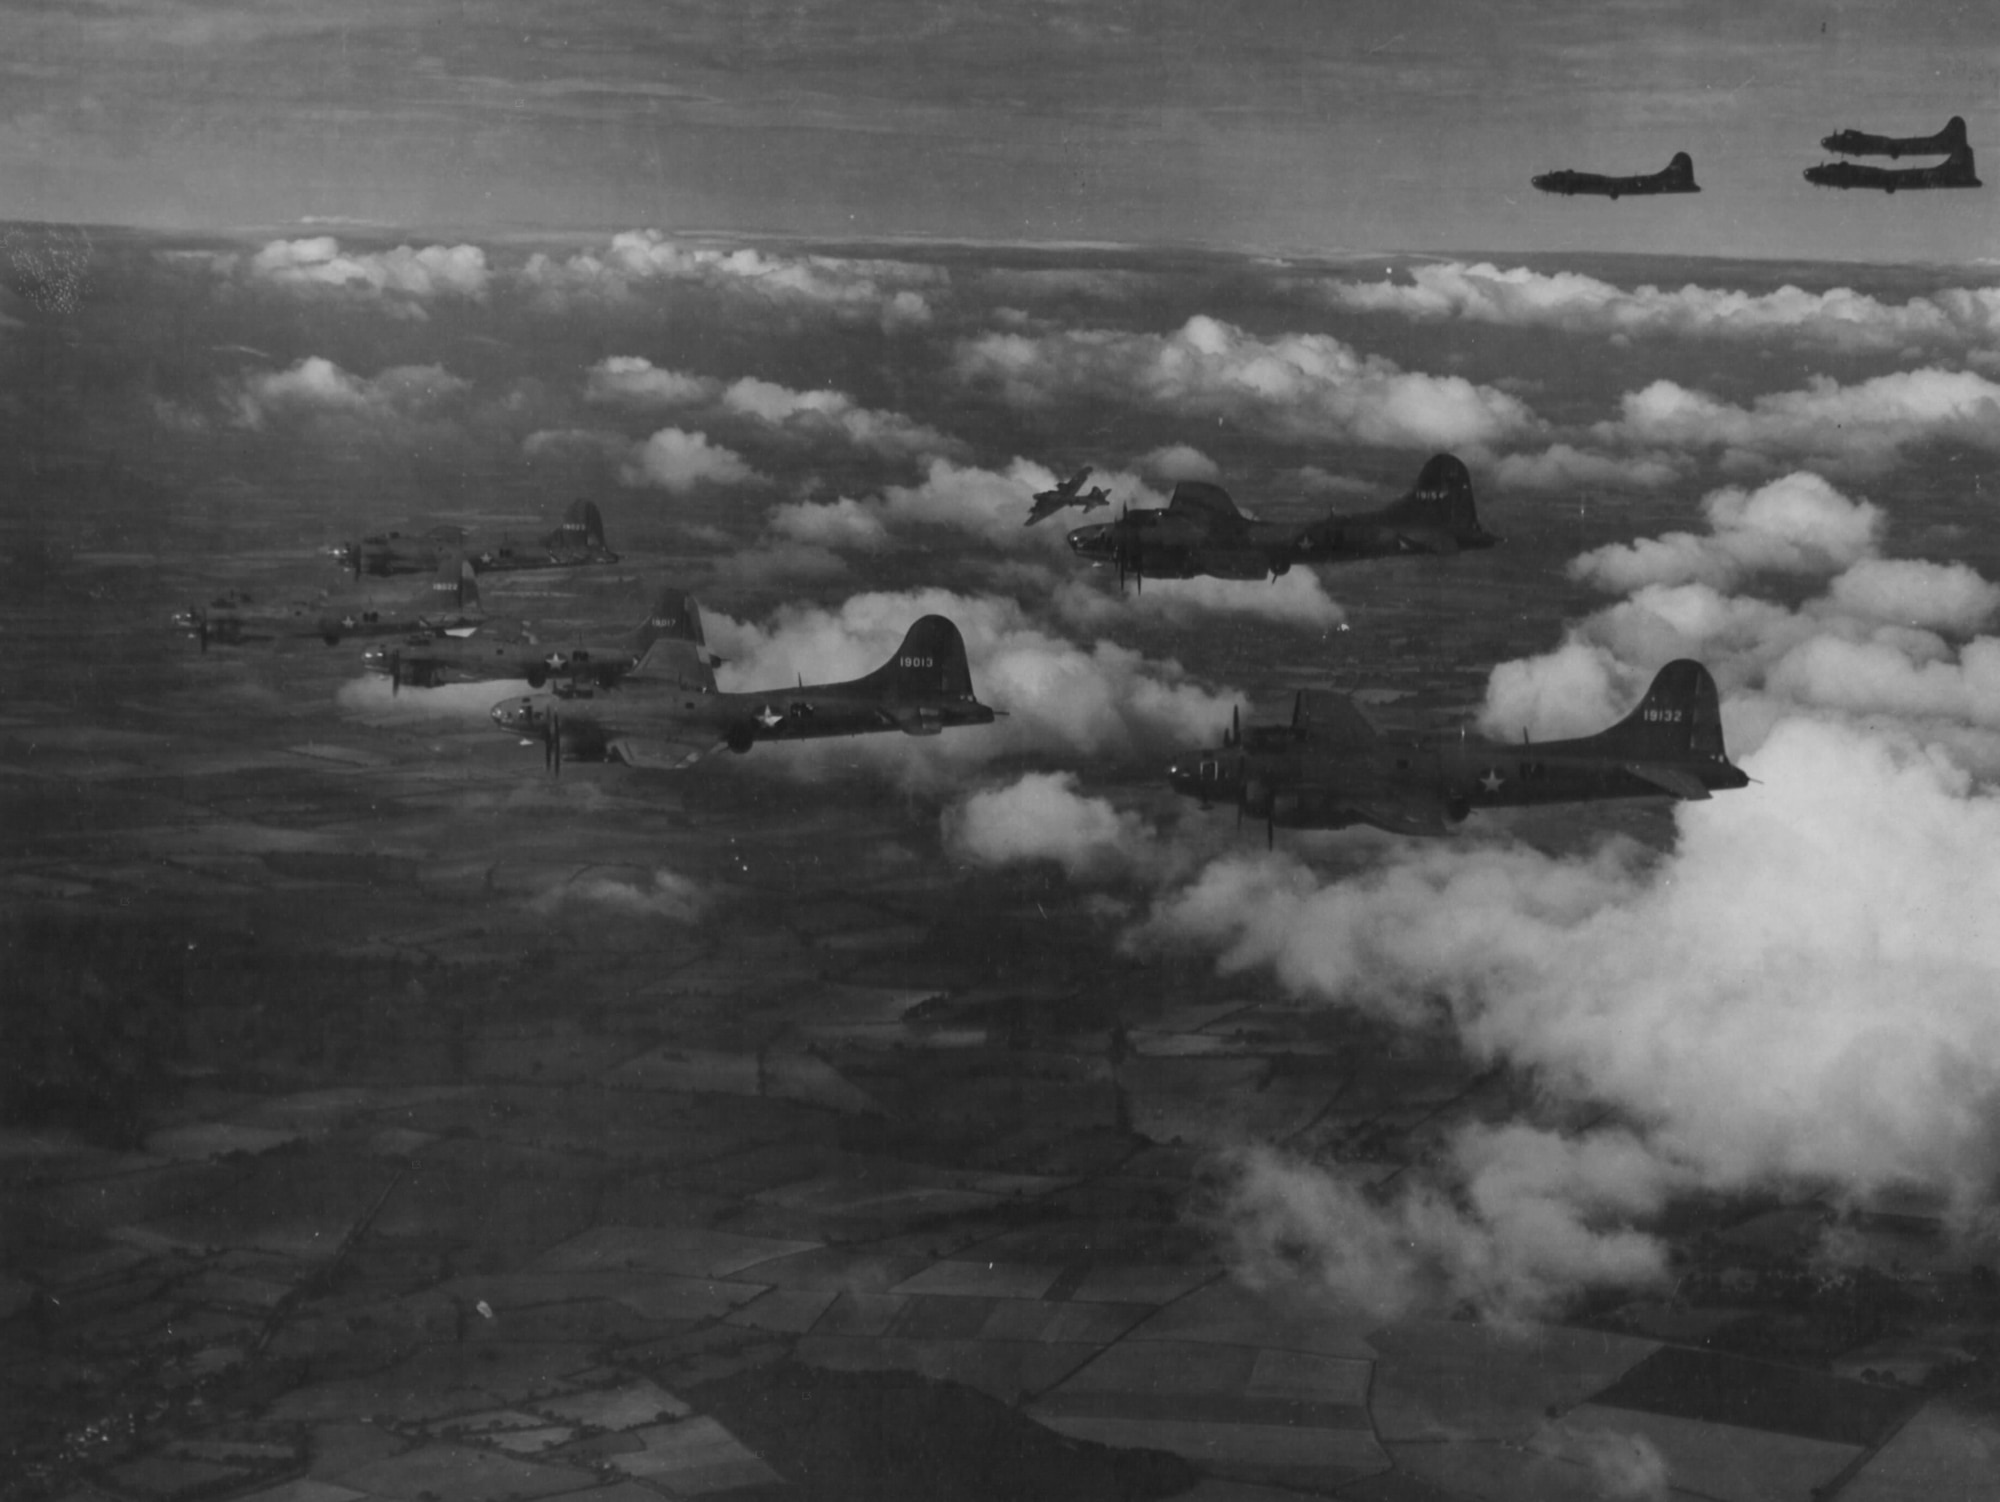 On August 17, 1942, twelve B-17Es struck the railroad marshalling yards at Rouen-Sotteville in France, marking the first Eighth Air Force heavy bomber raid.  Many of the aircraft used on this first raid are seen here on a training exercise over England.